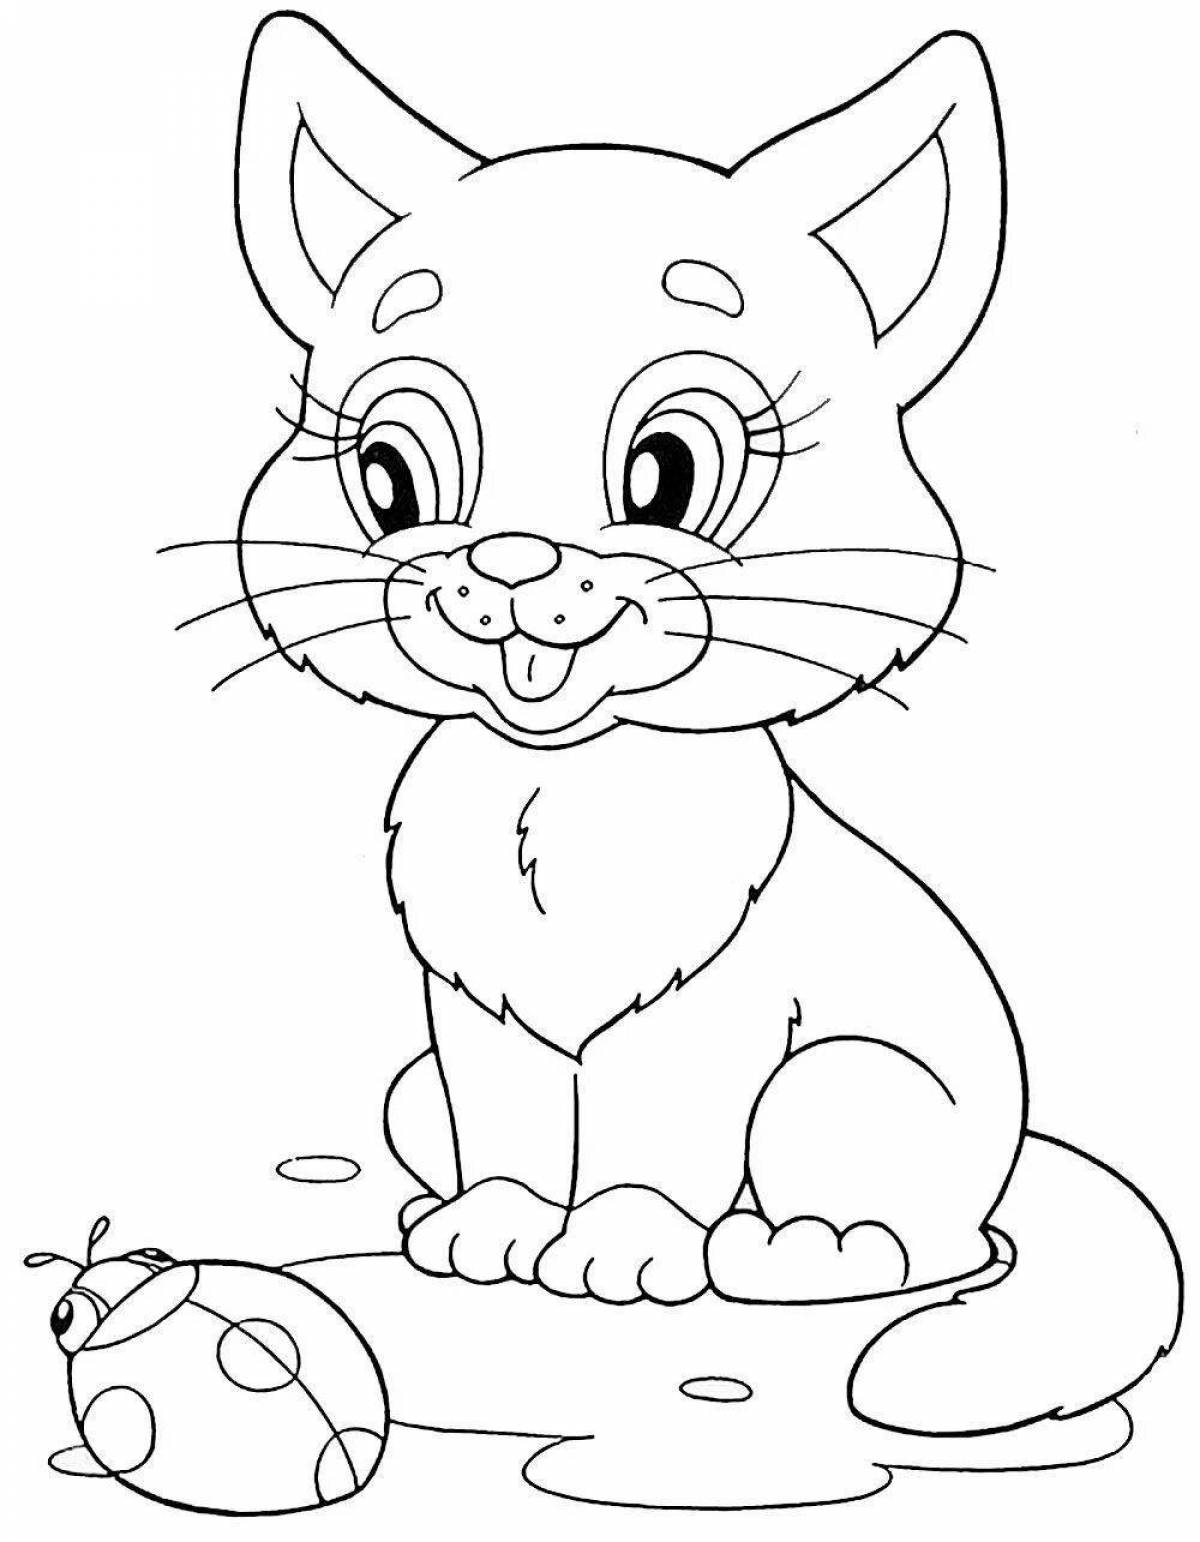 A wonderful coloring book for children 6-7 years old for girls animals